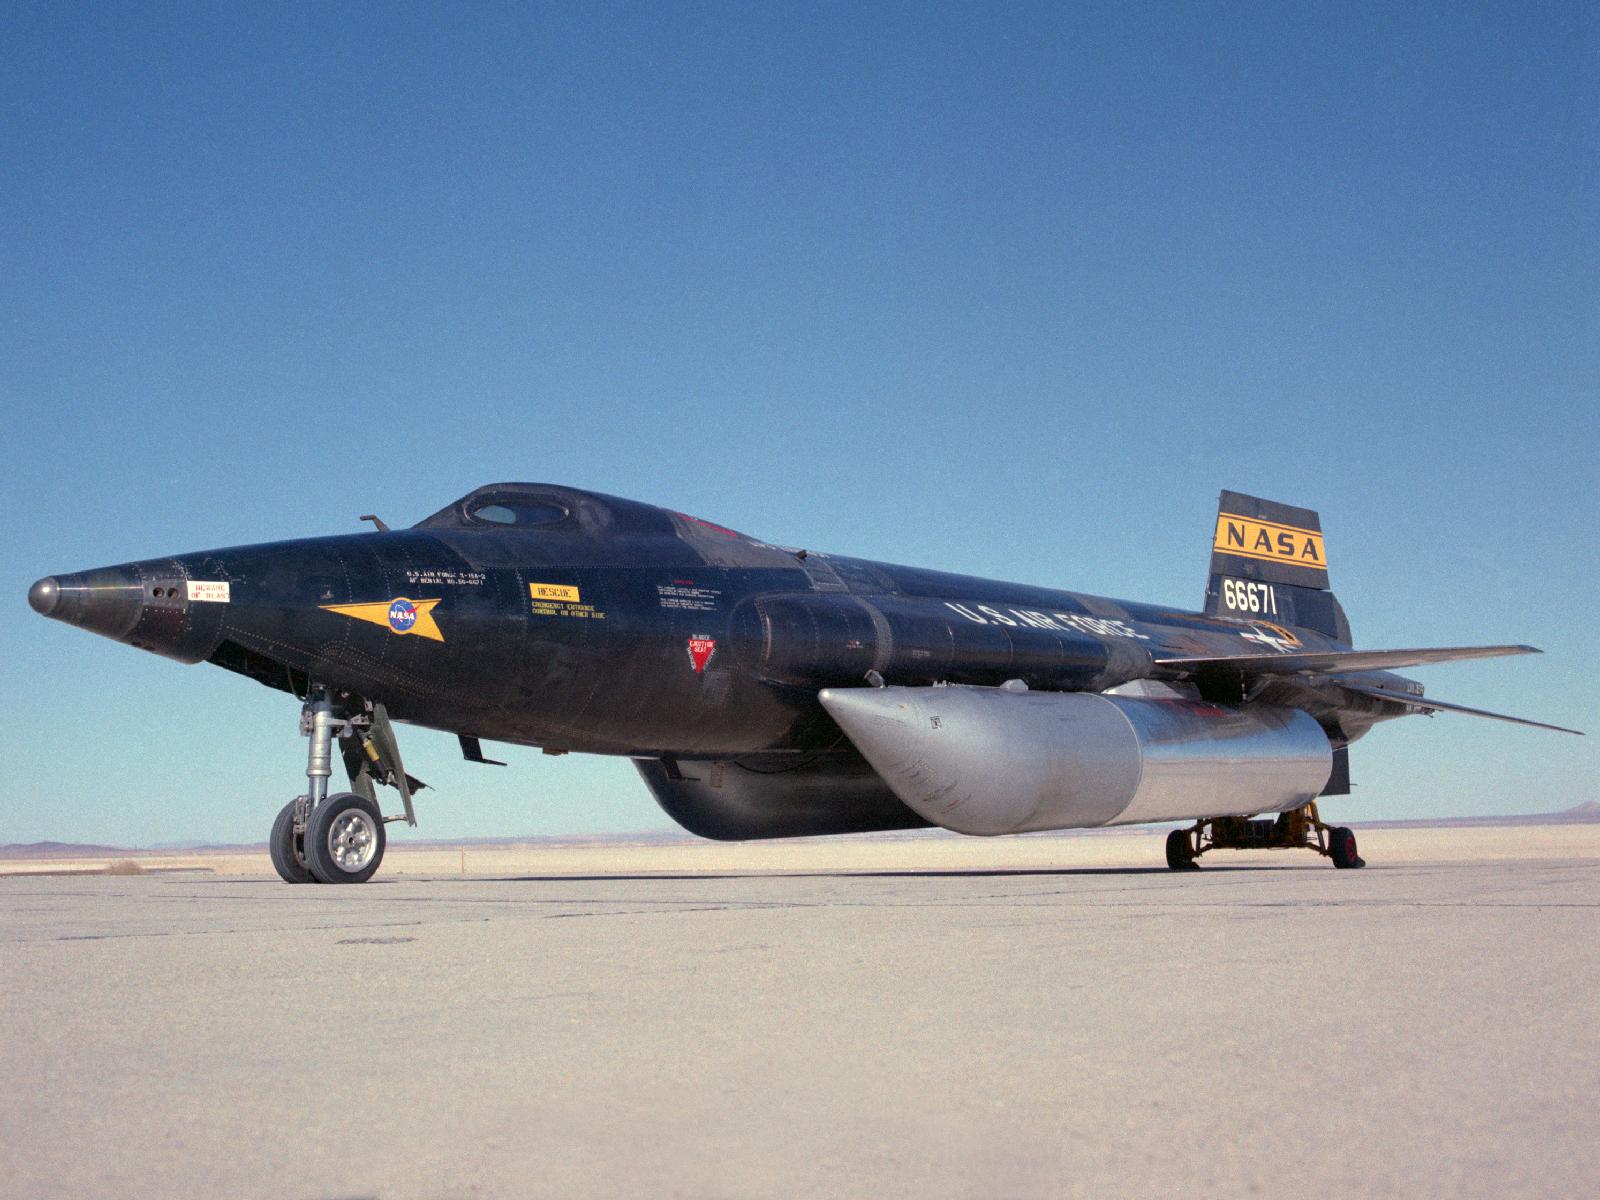 North American Aviation X-15A-2 56-6671 on Rogers Dry Lake. In addition to the lengthened fuselage and external tanks, the nose wheel strut is longer and the windshields have been changed to an oval shape. A wheeled dolly supports the aft end of the rocketplane. (NASA)